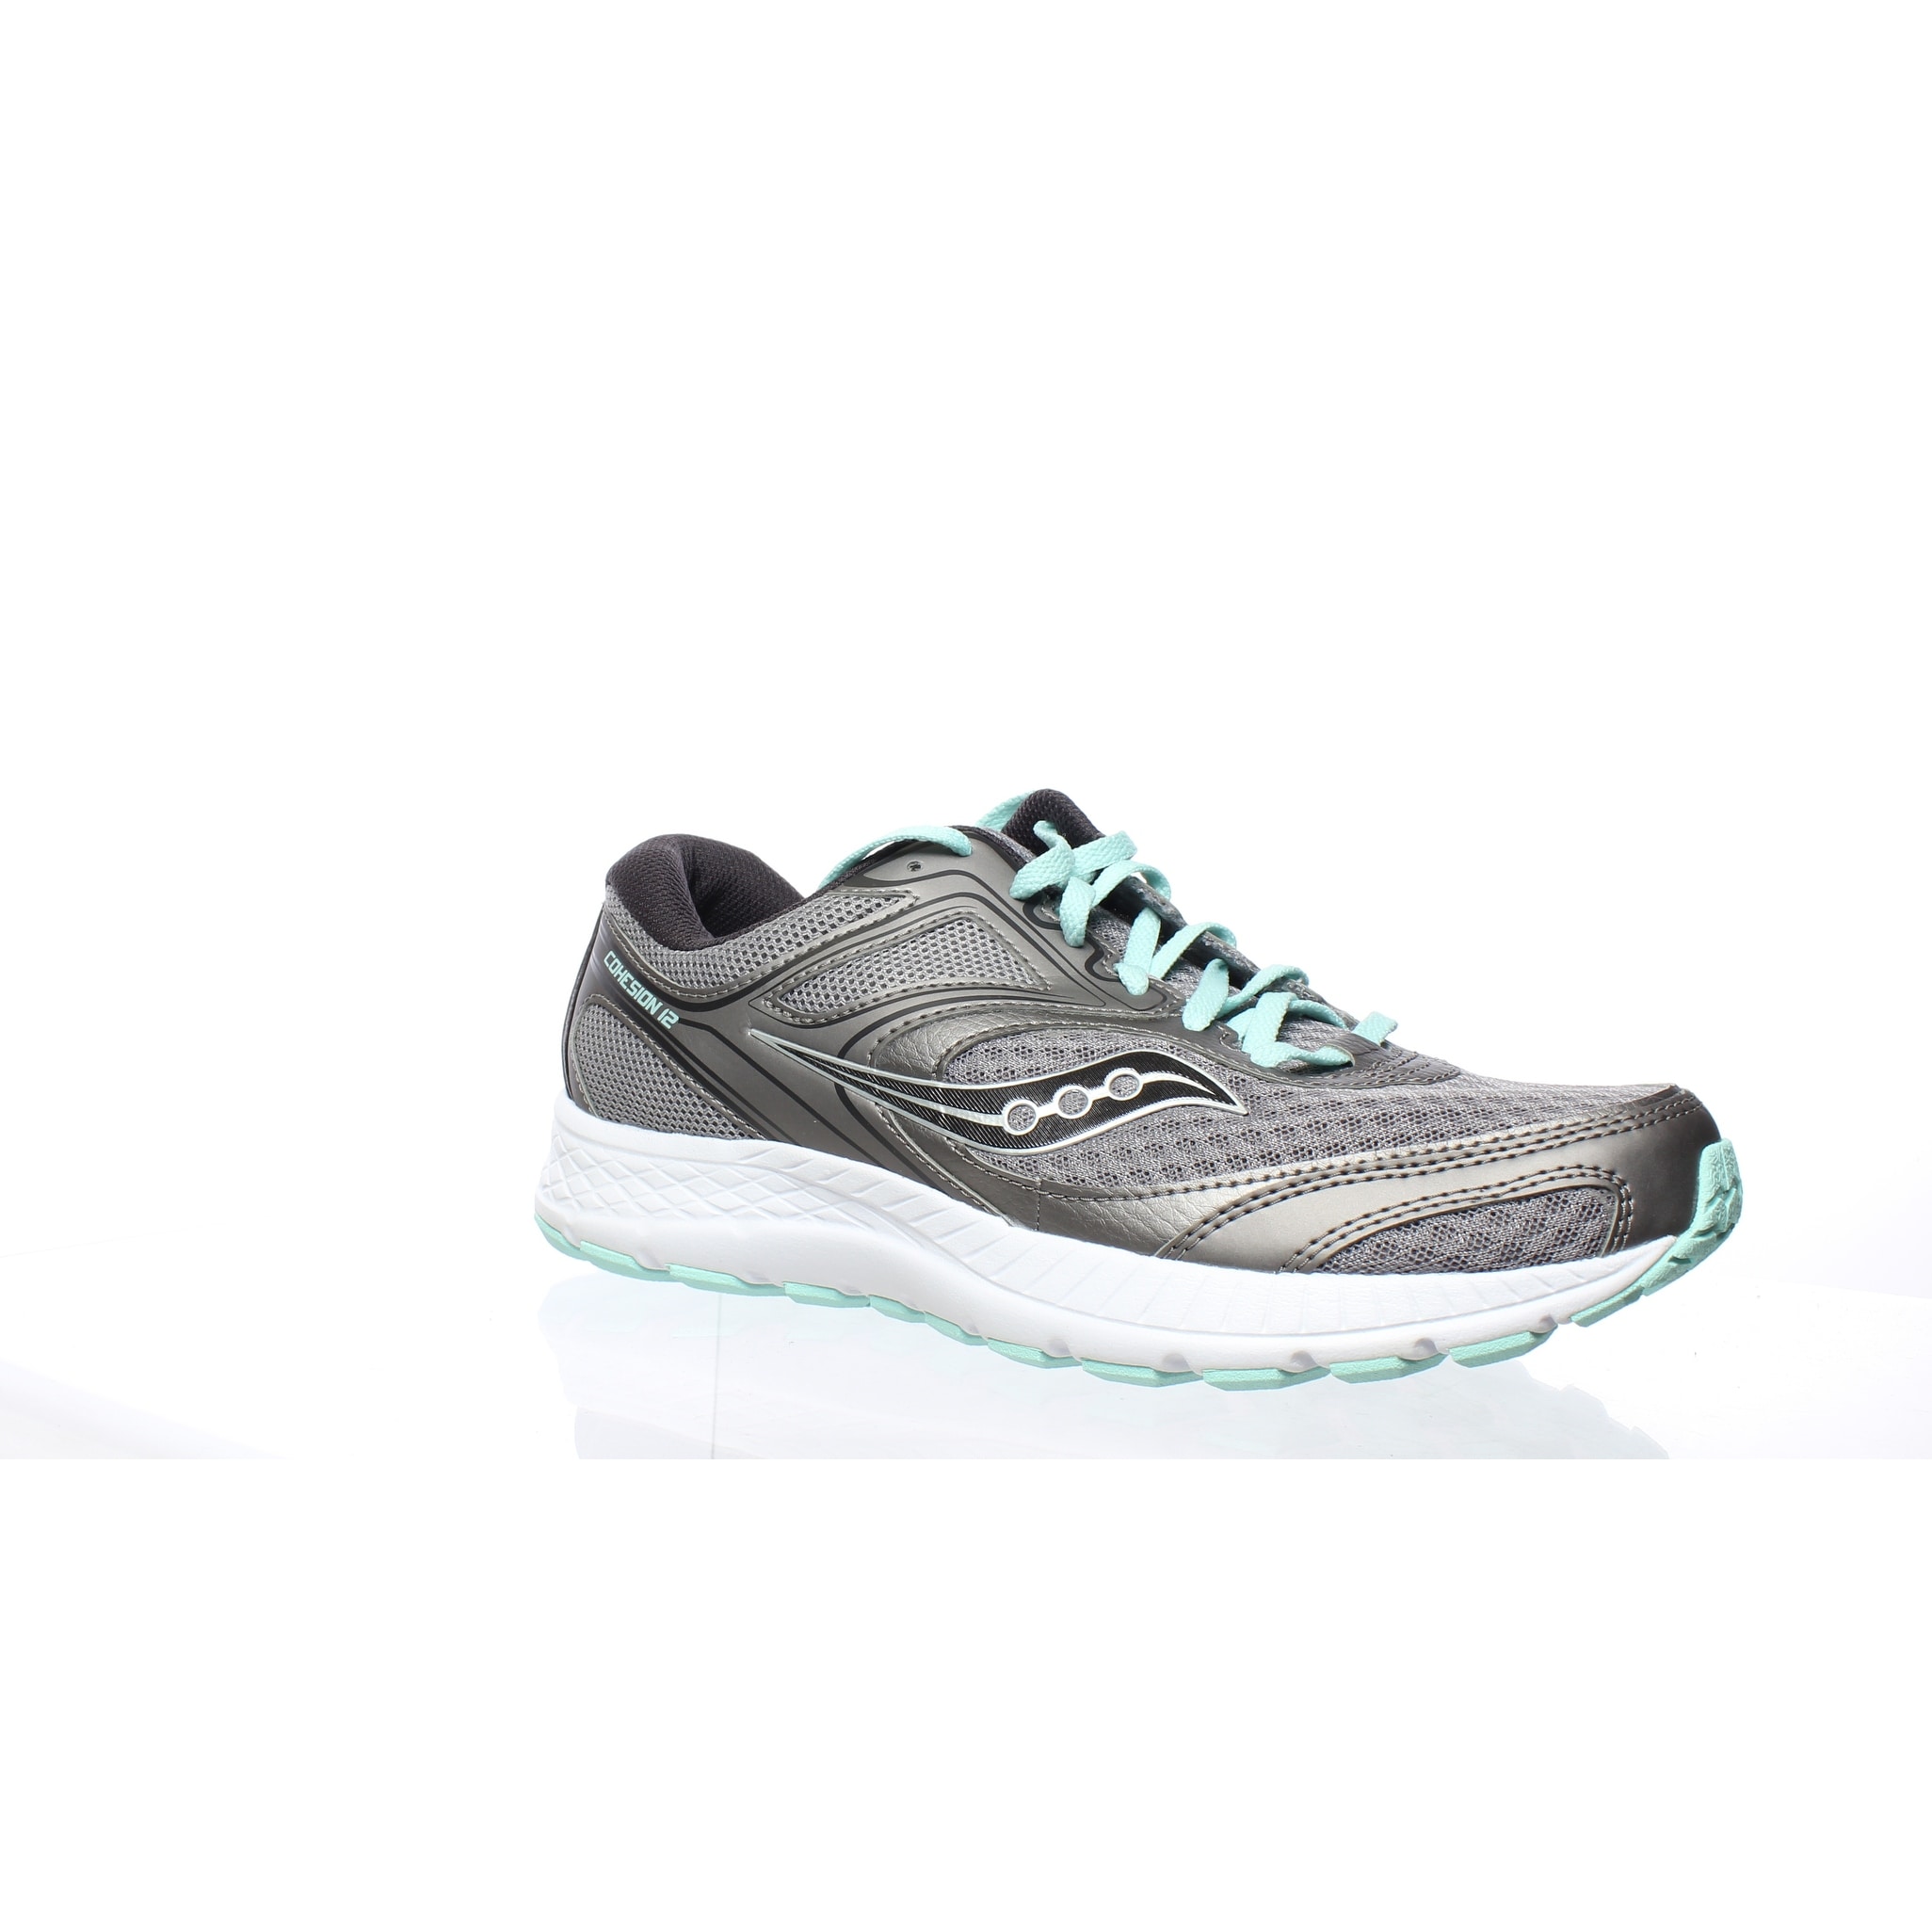 saucony women's running shoes size 9